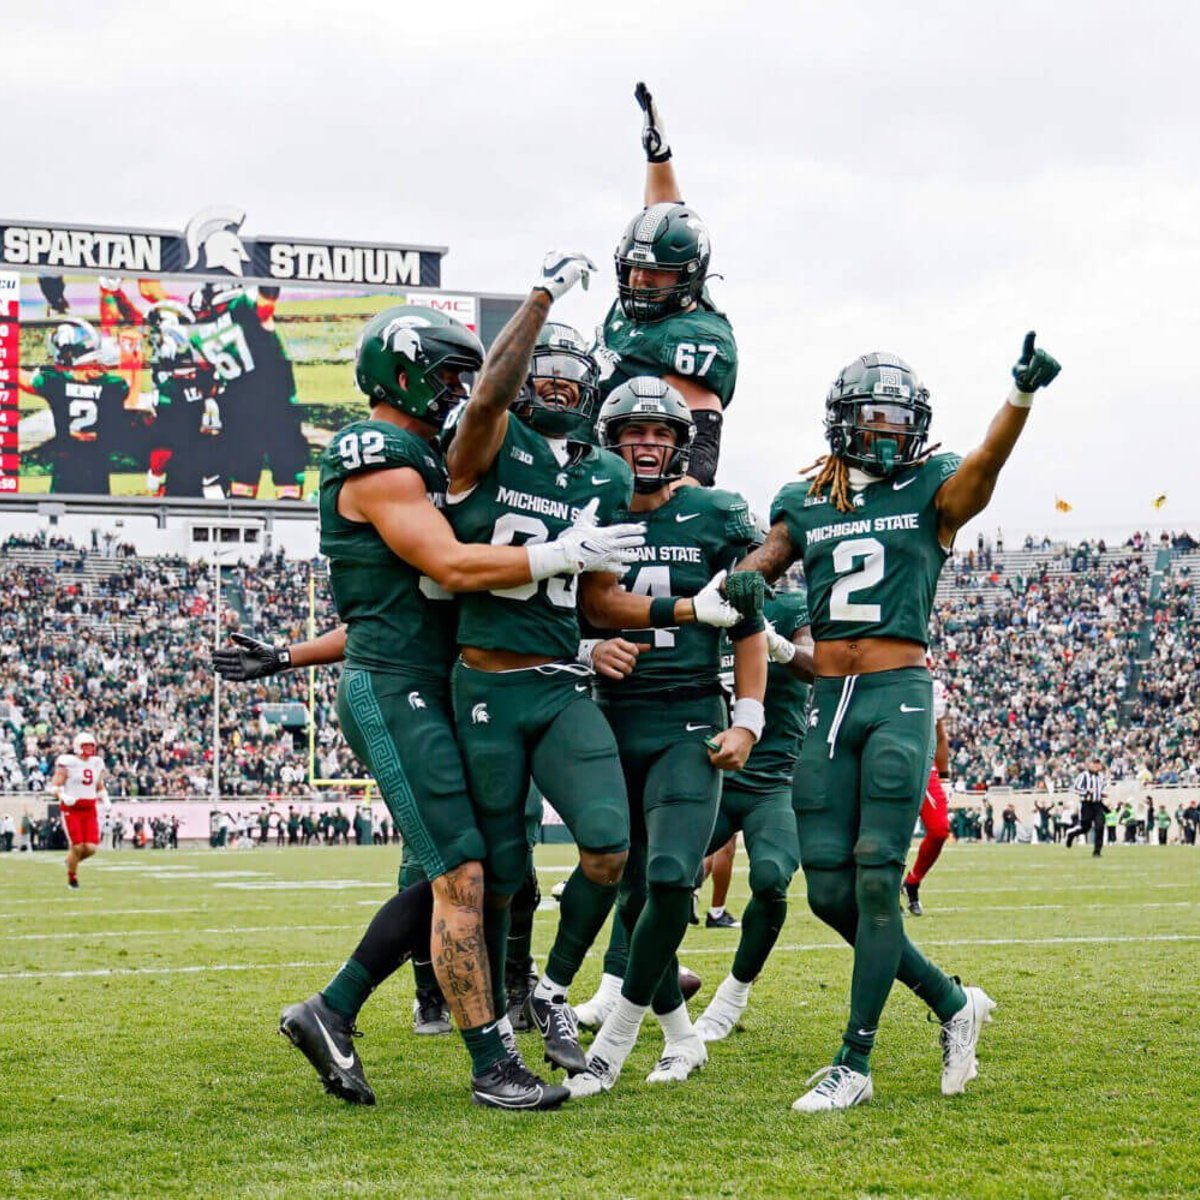 Blessed to receive an offer from Michigan State University! @JoeS_Rossi @CoachHawk_5 @Coach_Smith @MSU_Football @ICCPFootball @MattBowen41 @MDohertyICCP